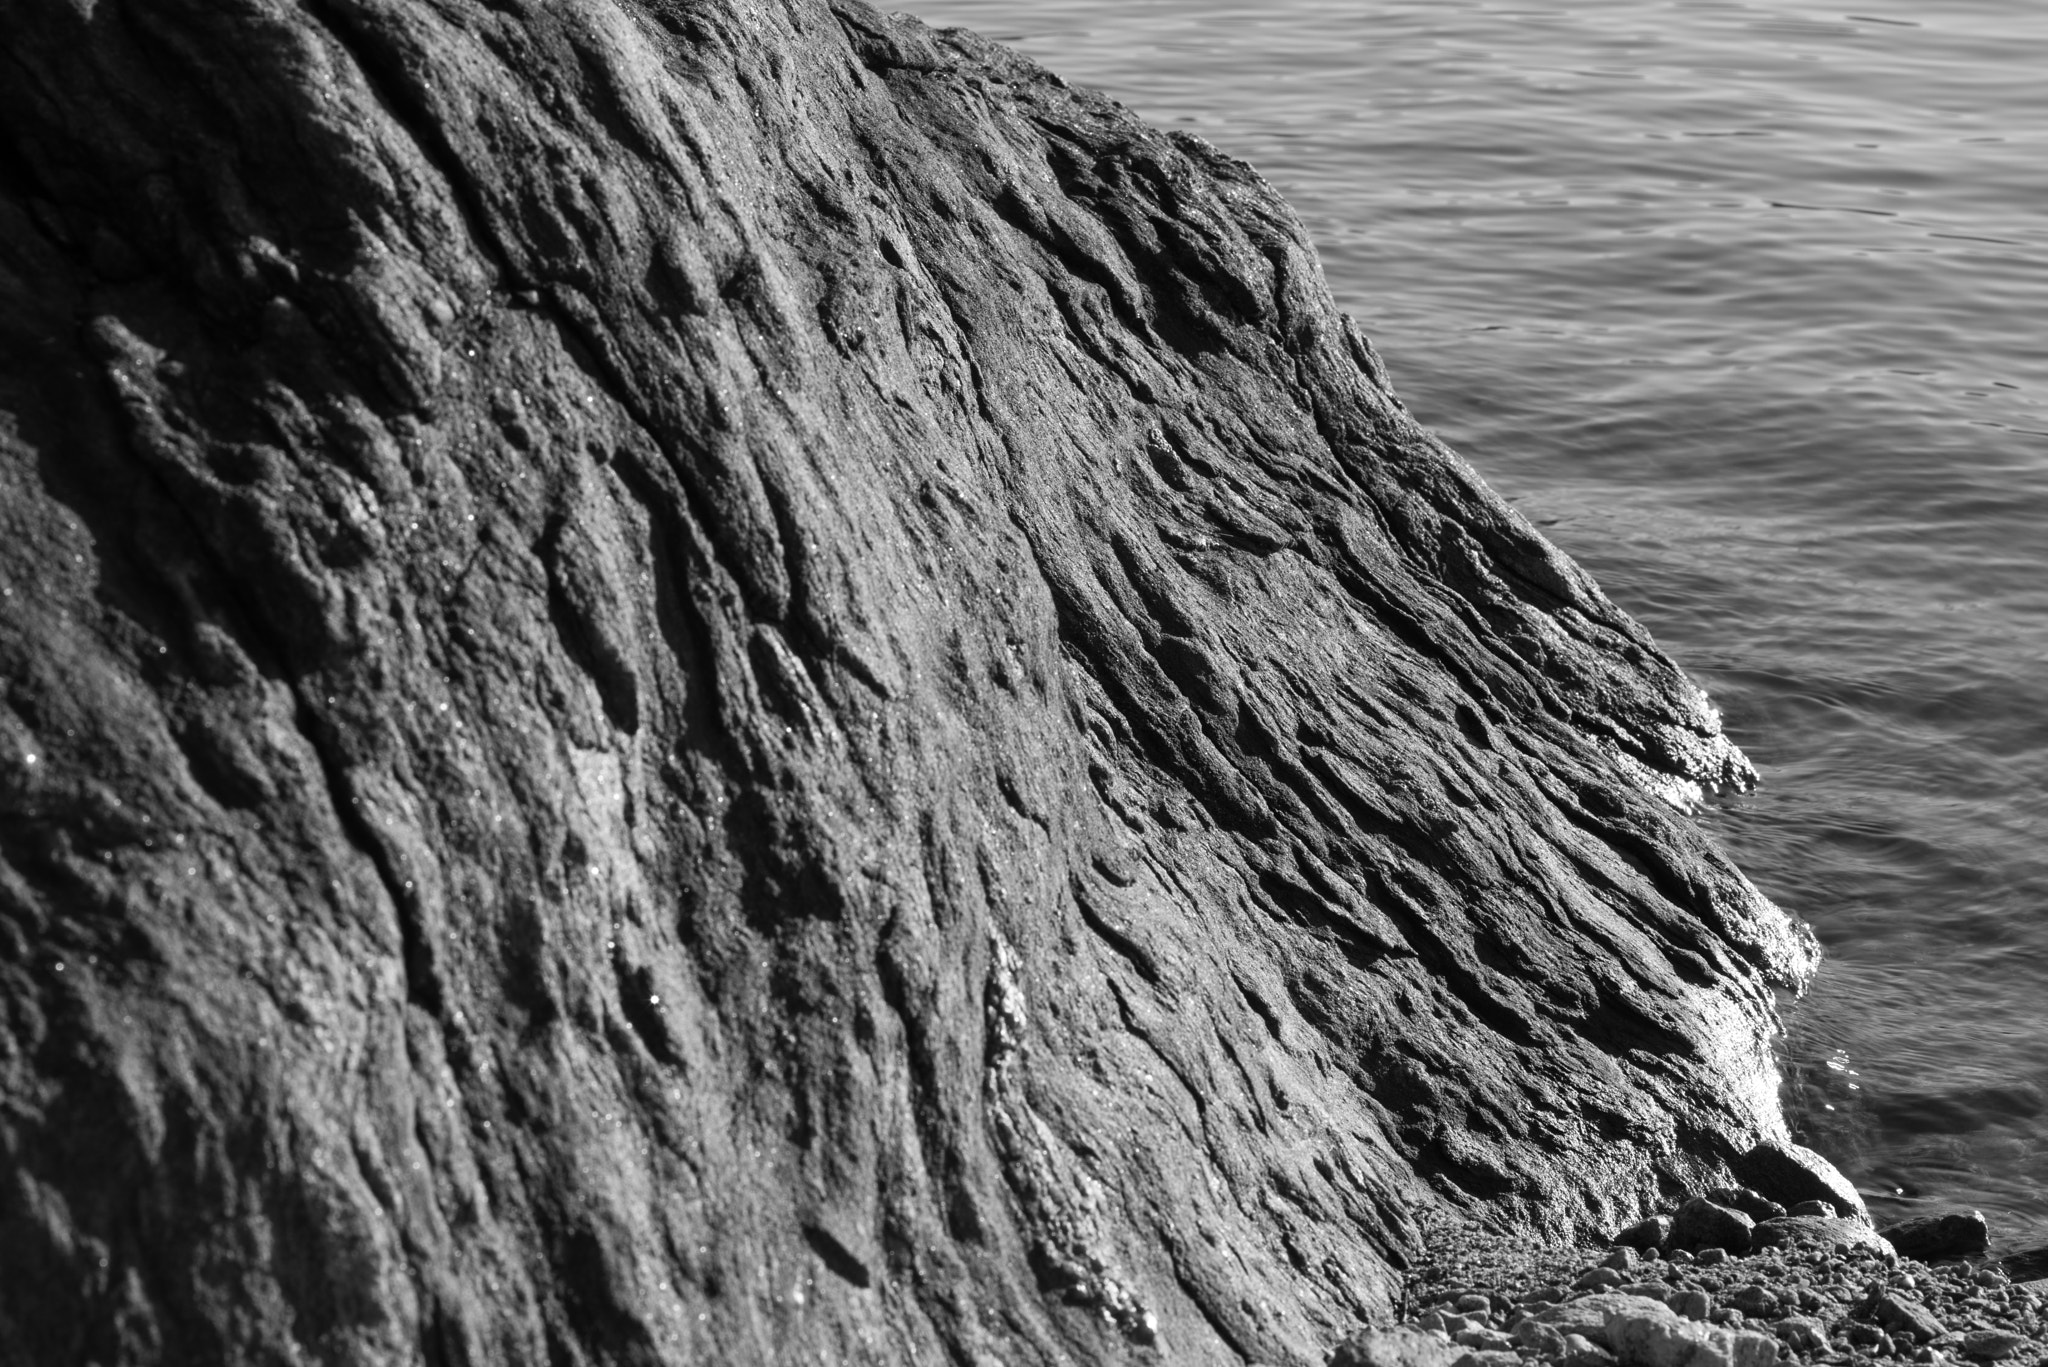 Pentax K-1 sample photo. Ripples of rocks and water photography